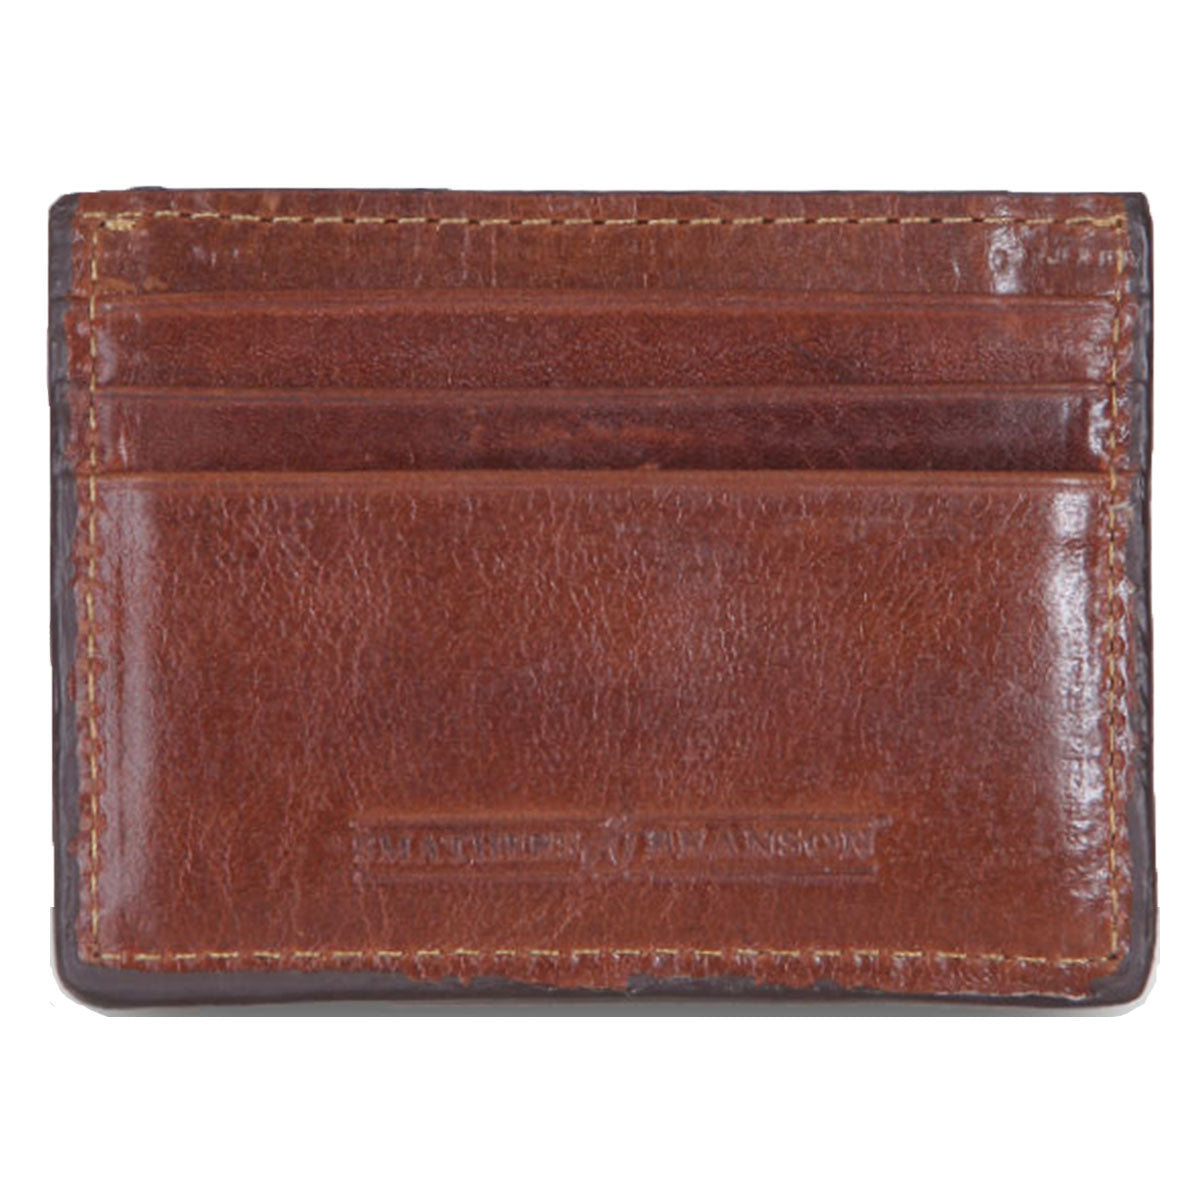 Texas A&M Smathers & Branson Card Wallet